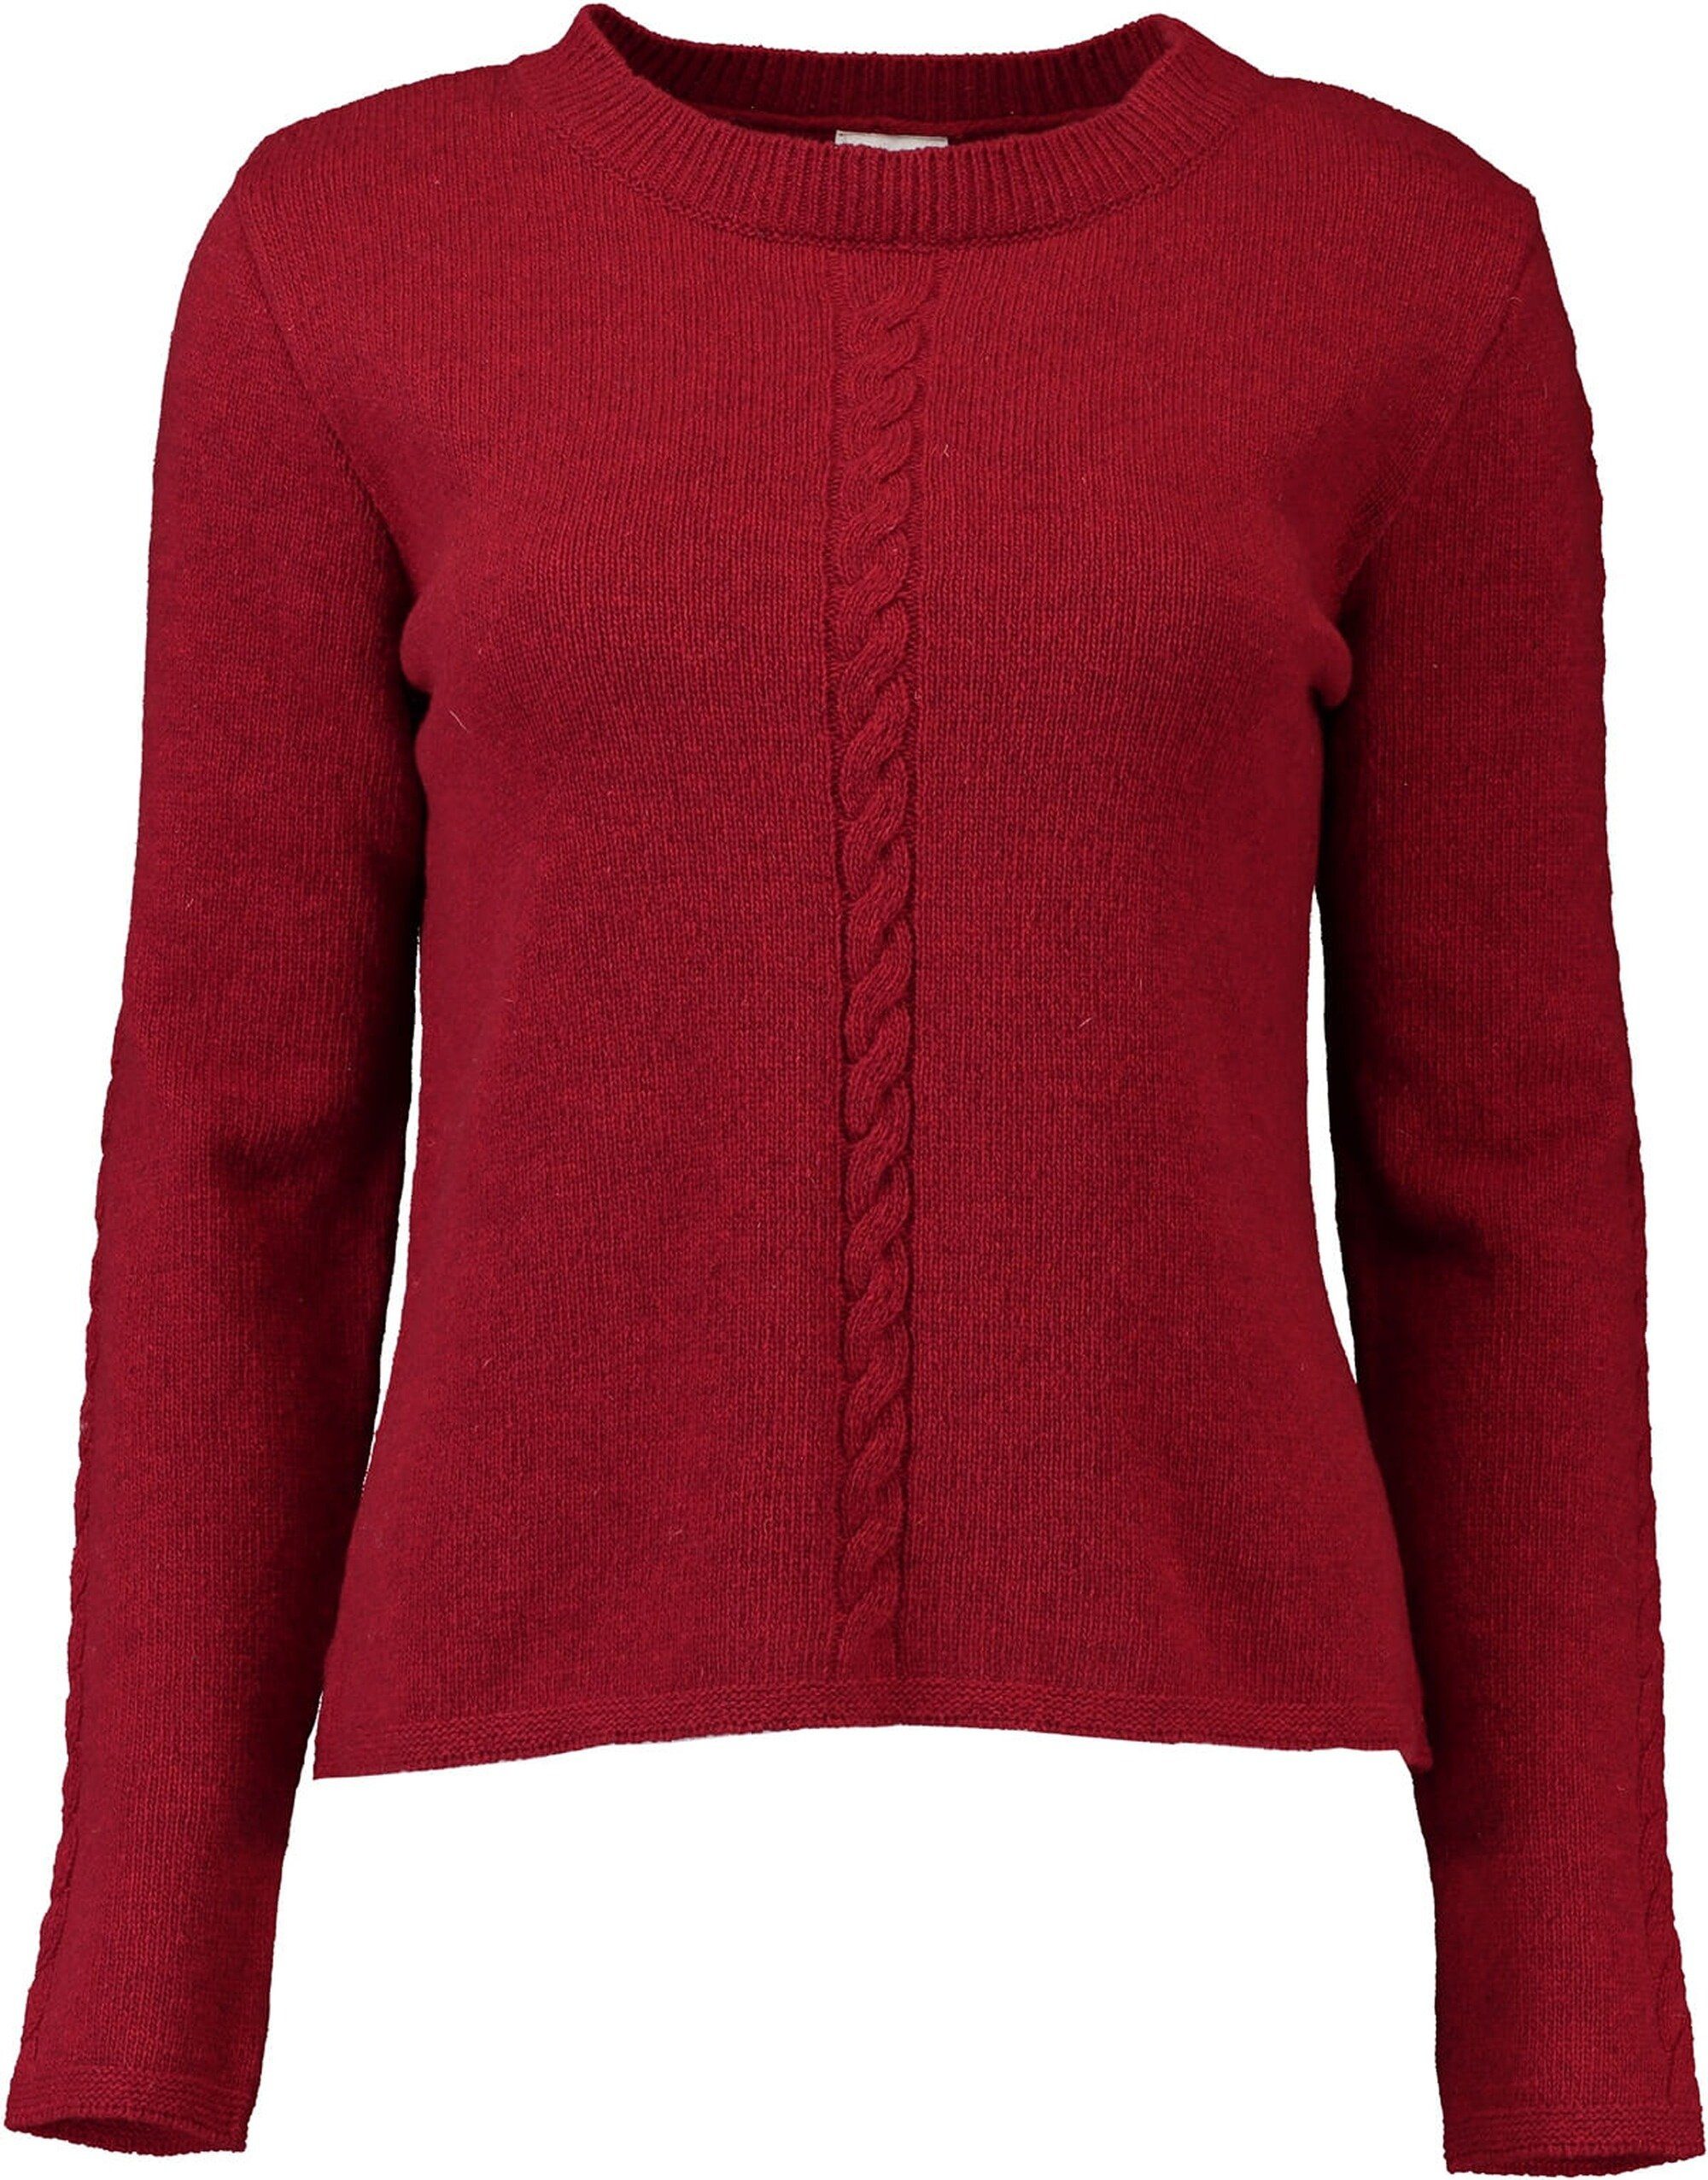 Wollmix-Pullover H. Strickpullover h.moser Moser rot